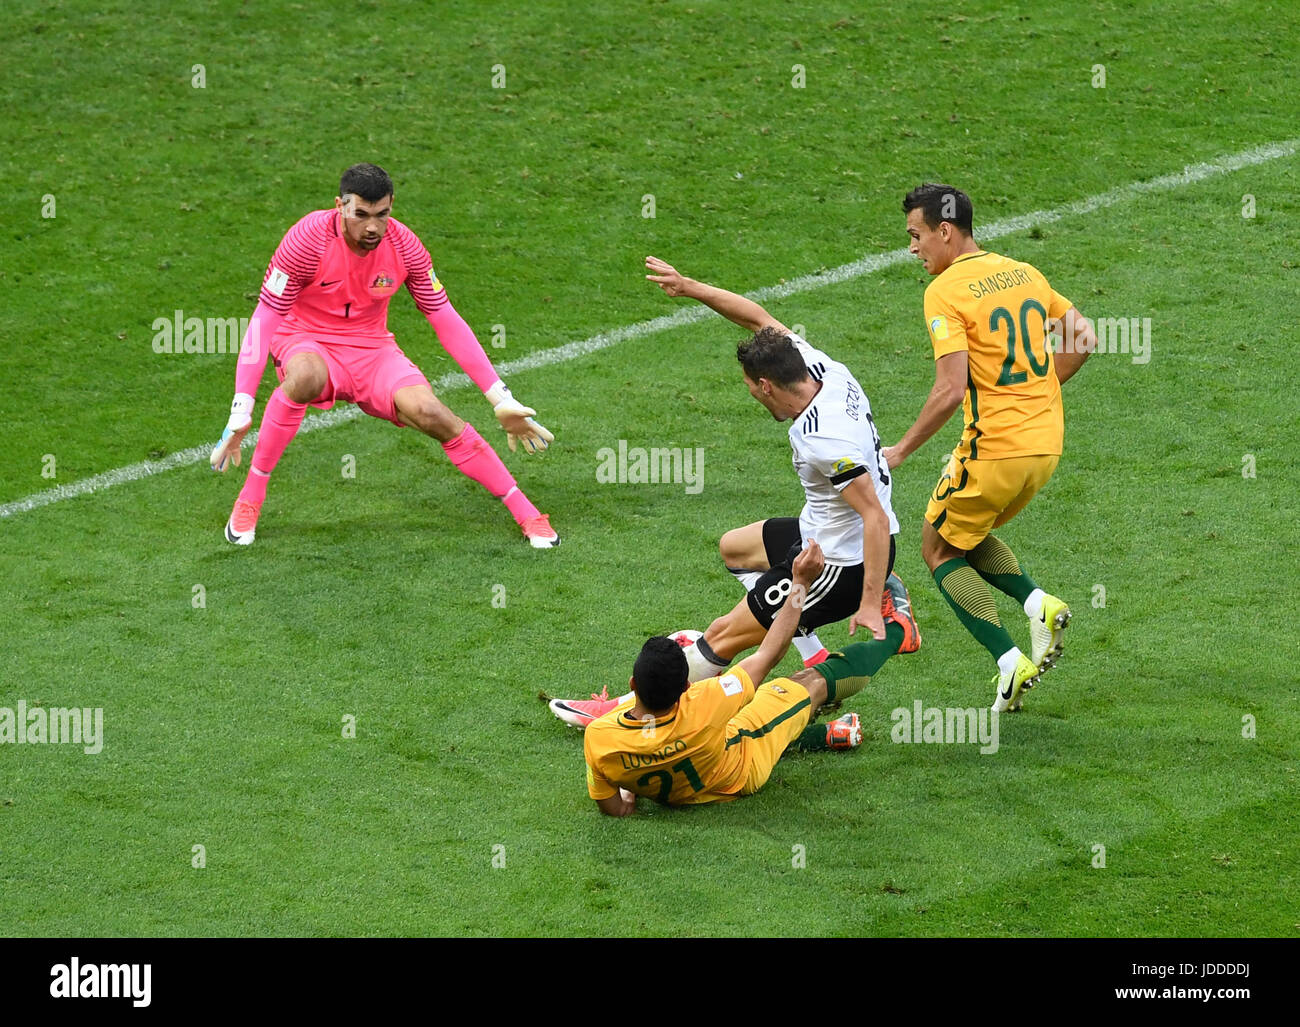 Sochi, Russia. 19th June, 2017. Australia's goalkeeper Maty Ryan (L-R) watches as his teammate Massimo Luongo fouls Germany's Leon Goretzka to concede a penalty during the Confederations Cup group stages Group B match between Australia and Germany in the Fisht Stadium in Sochi, Russia, 19 June 2017. Photo: Marius Becker/dpa/Alamy Live News Stock Photo